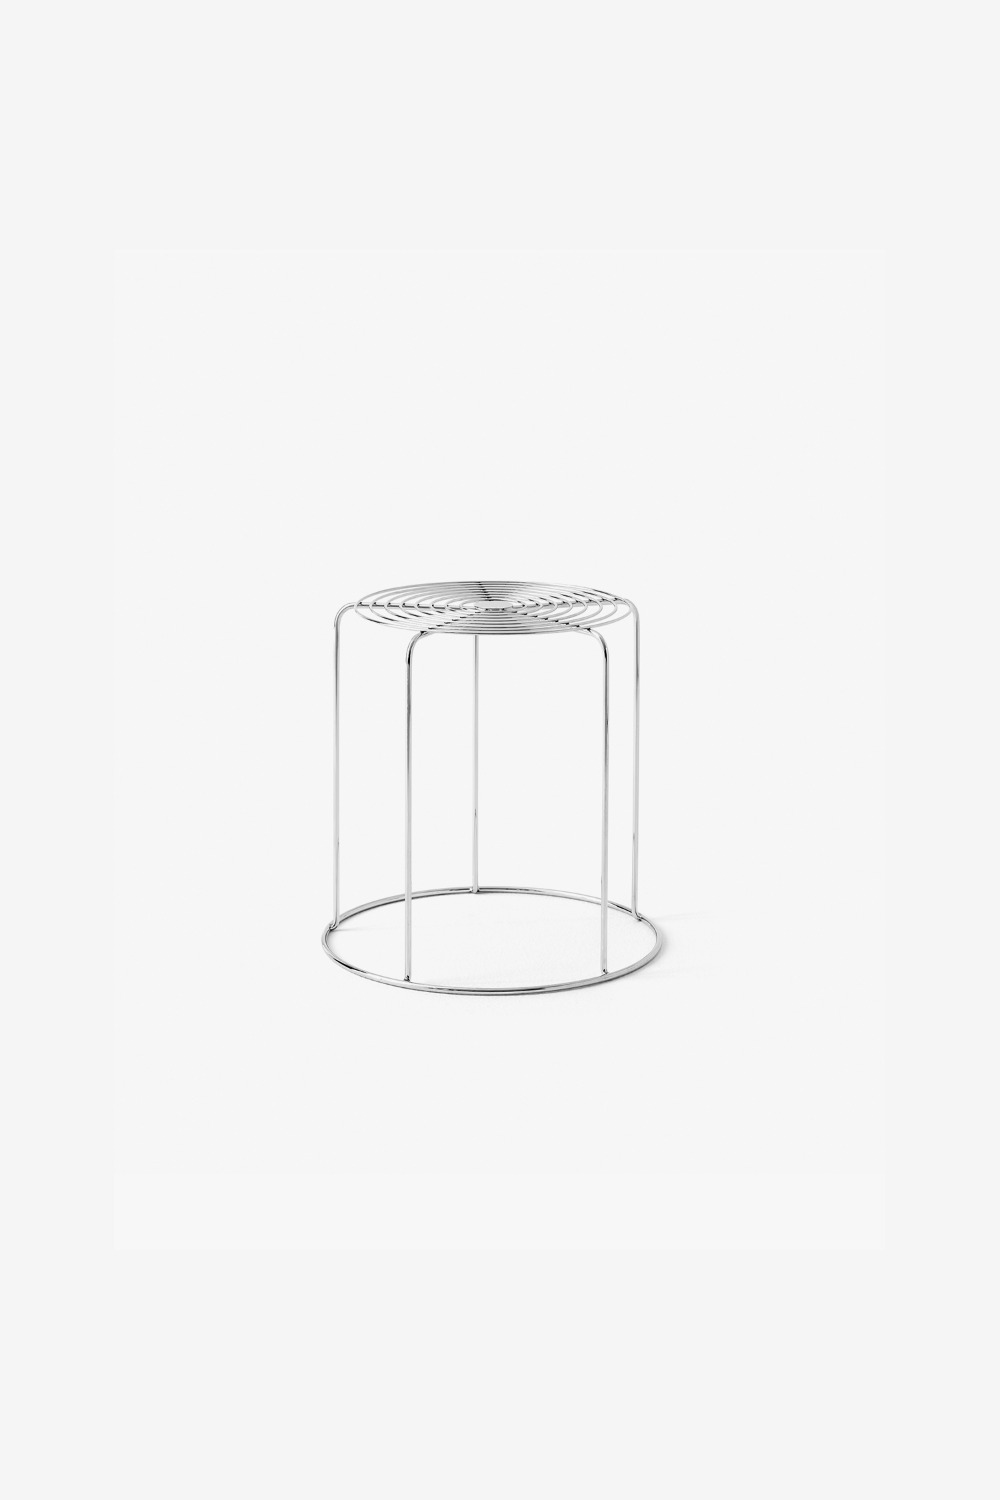 [&amp;Tradition] Wire Stool /VP11 (Stainless Steel)